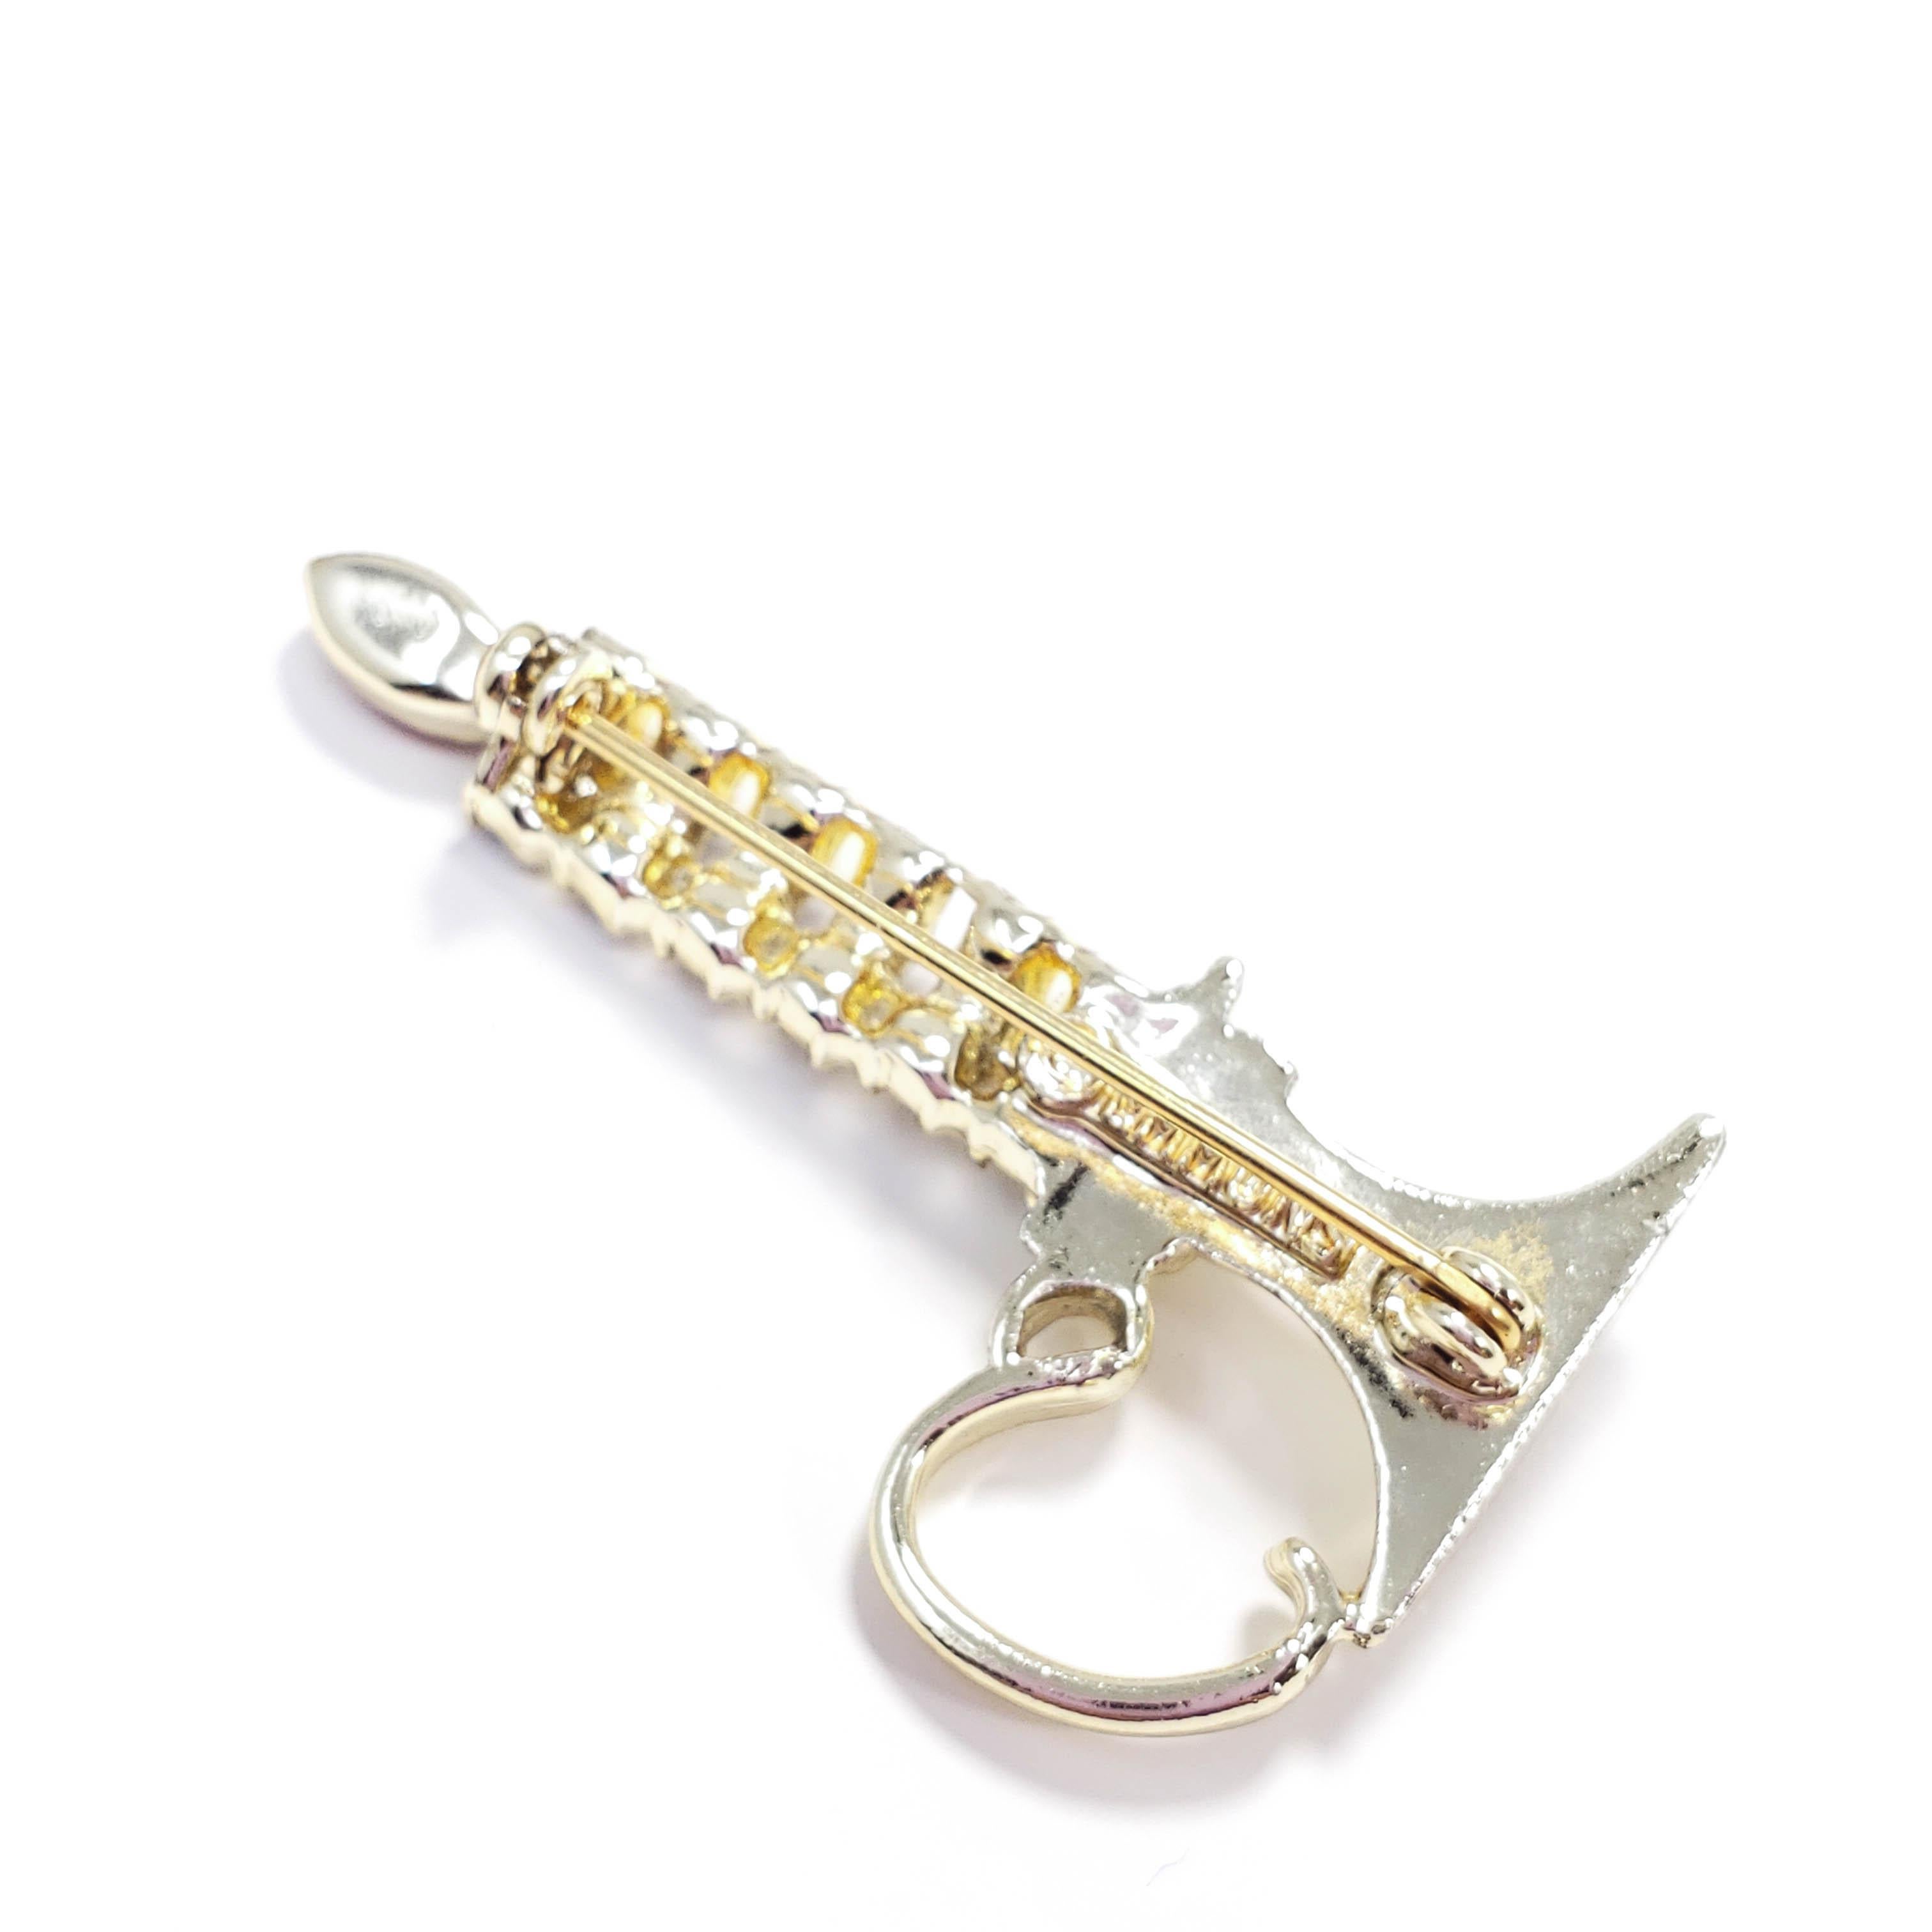 Women's or Men's Emmons Glowing Candlestick Crystal Brooch Pin in Gold, Mid 1900